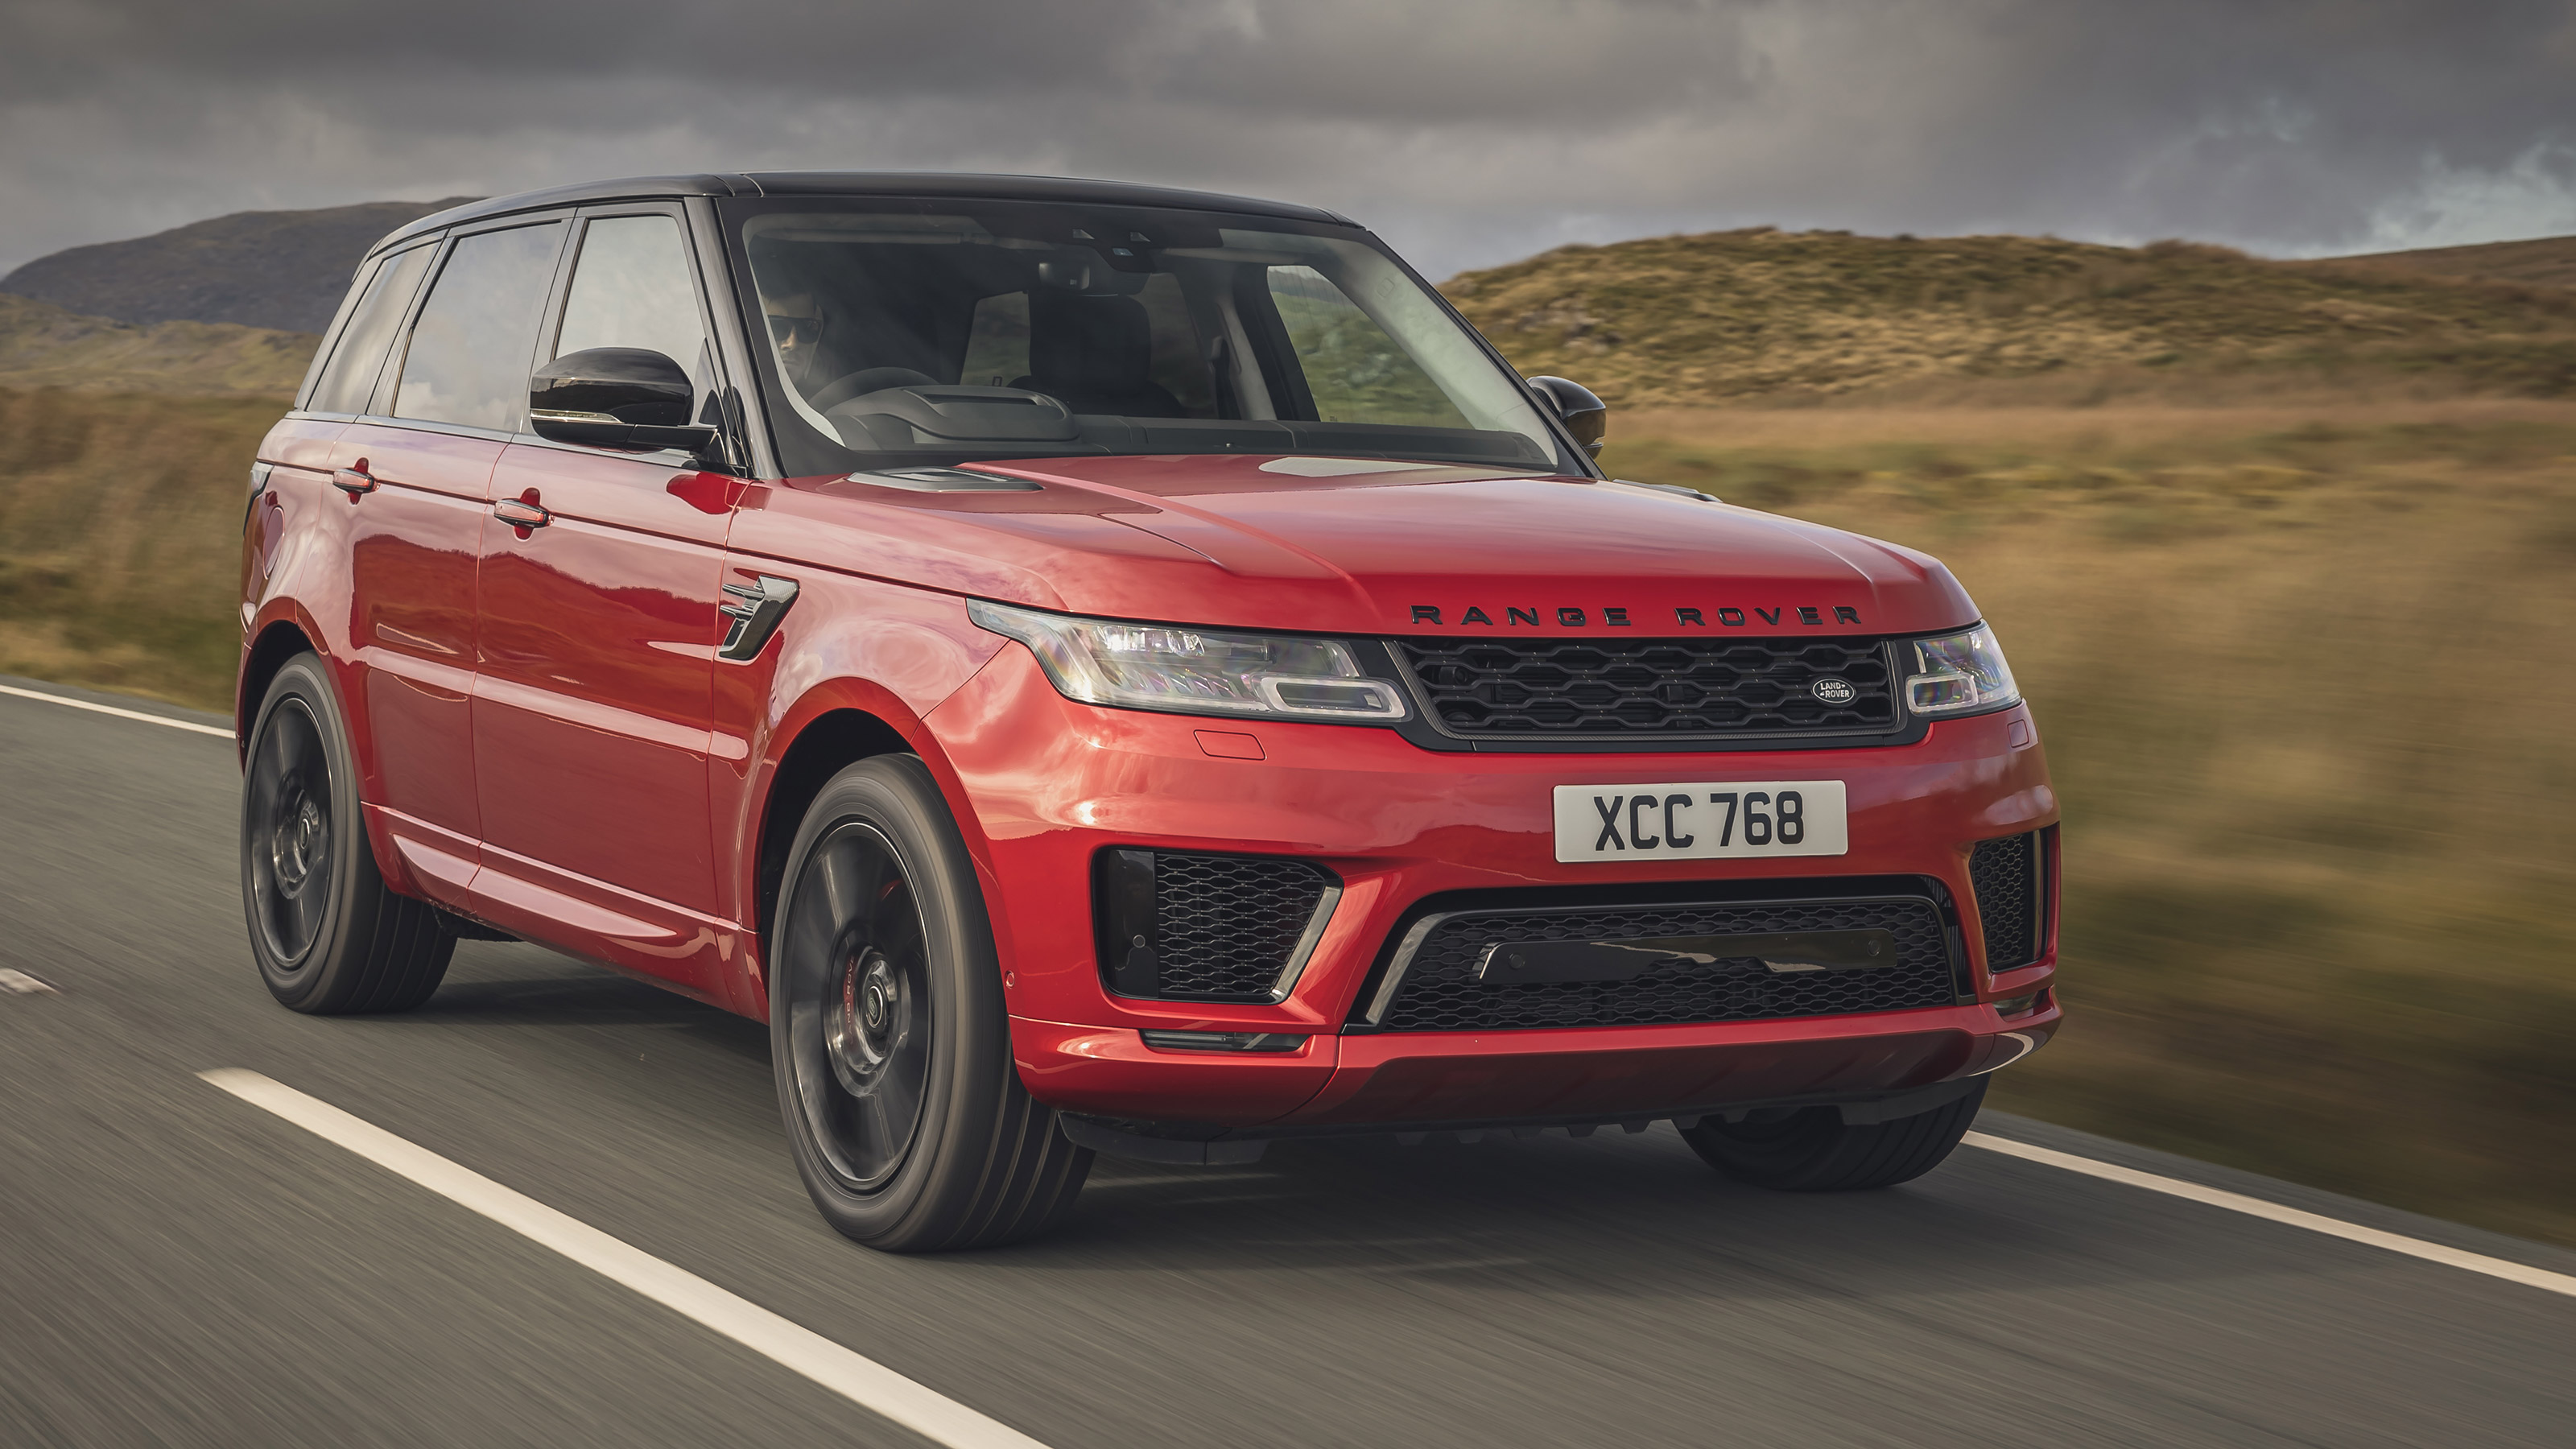 Range Rover Sport review prices, specs and 060 time evo